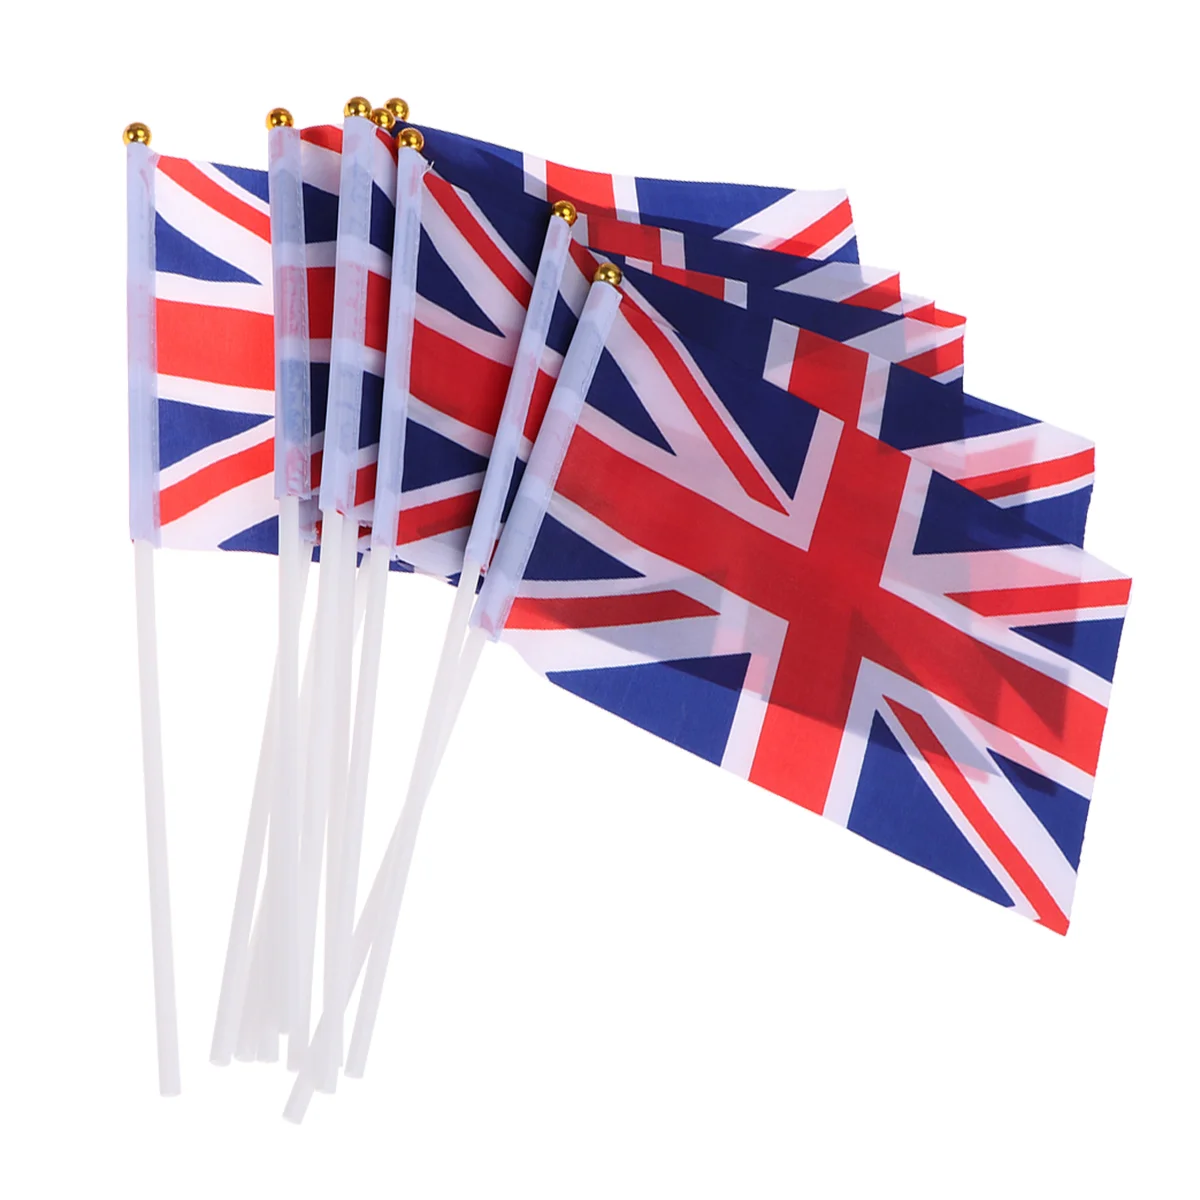 

100Pcs Small Britain Flag British Union Jack UK Flag Hand Waving Flag for Soccer Game The Football Match